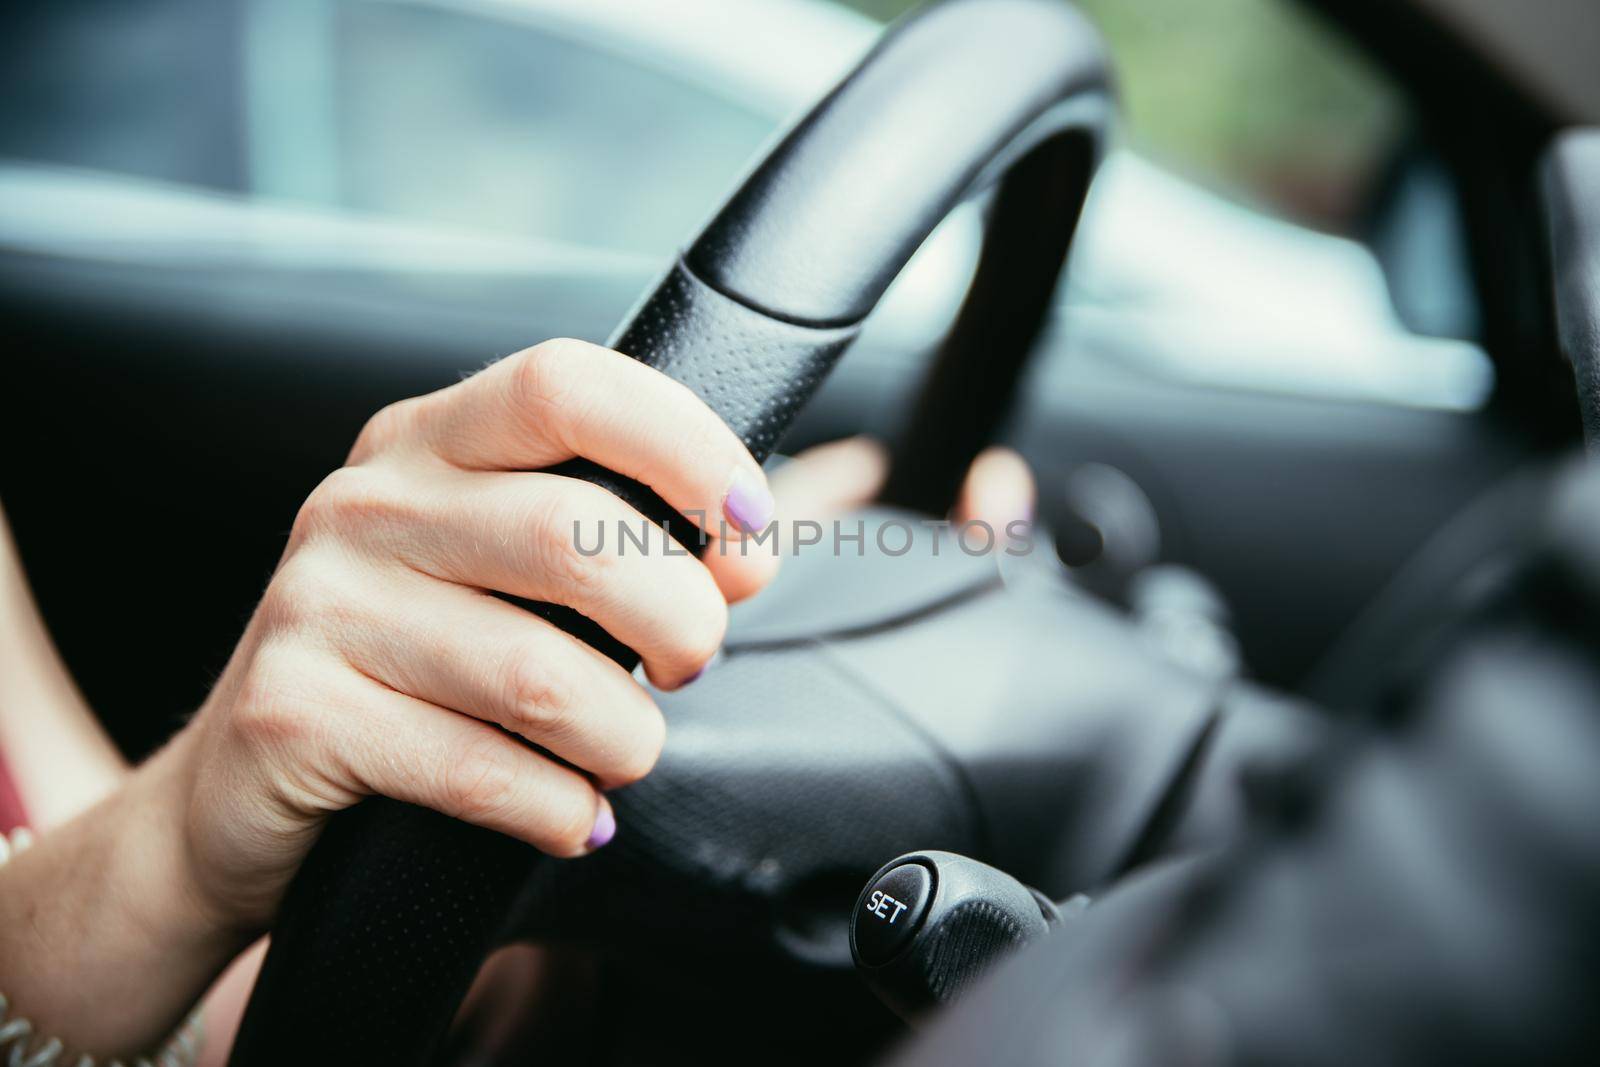 Sports car steering wheel, hands of a young girl with purple nail polish by Daxenbichler